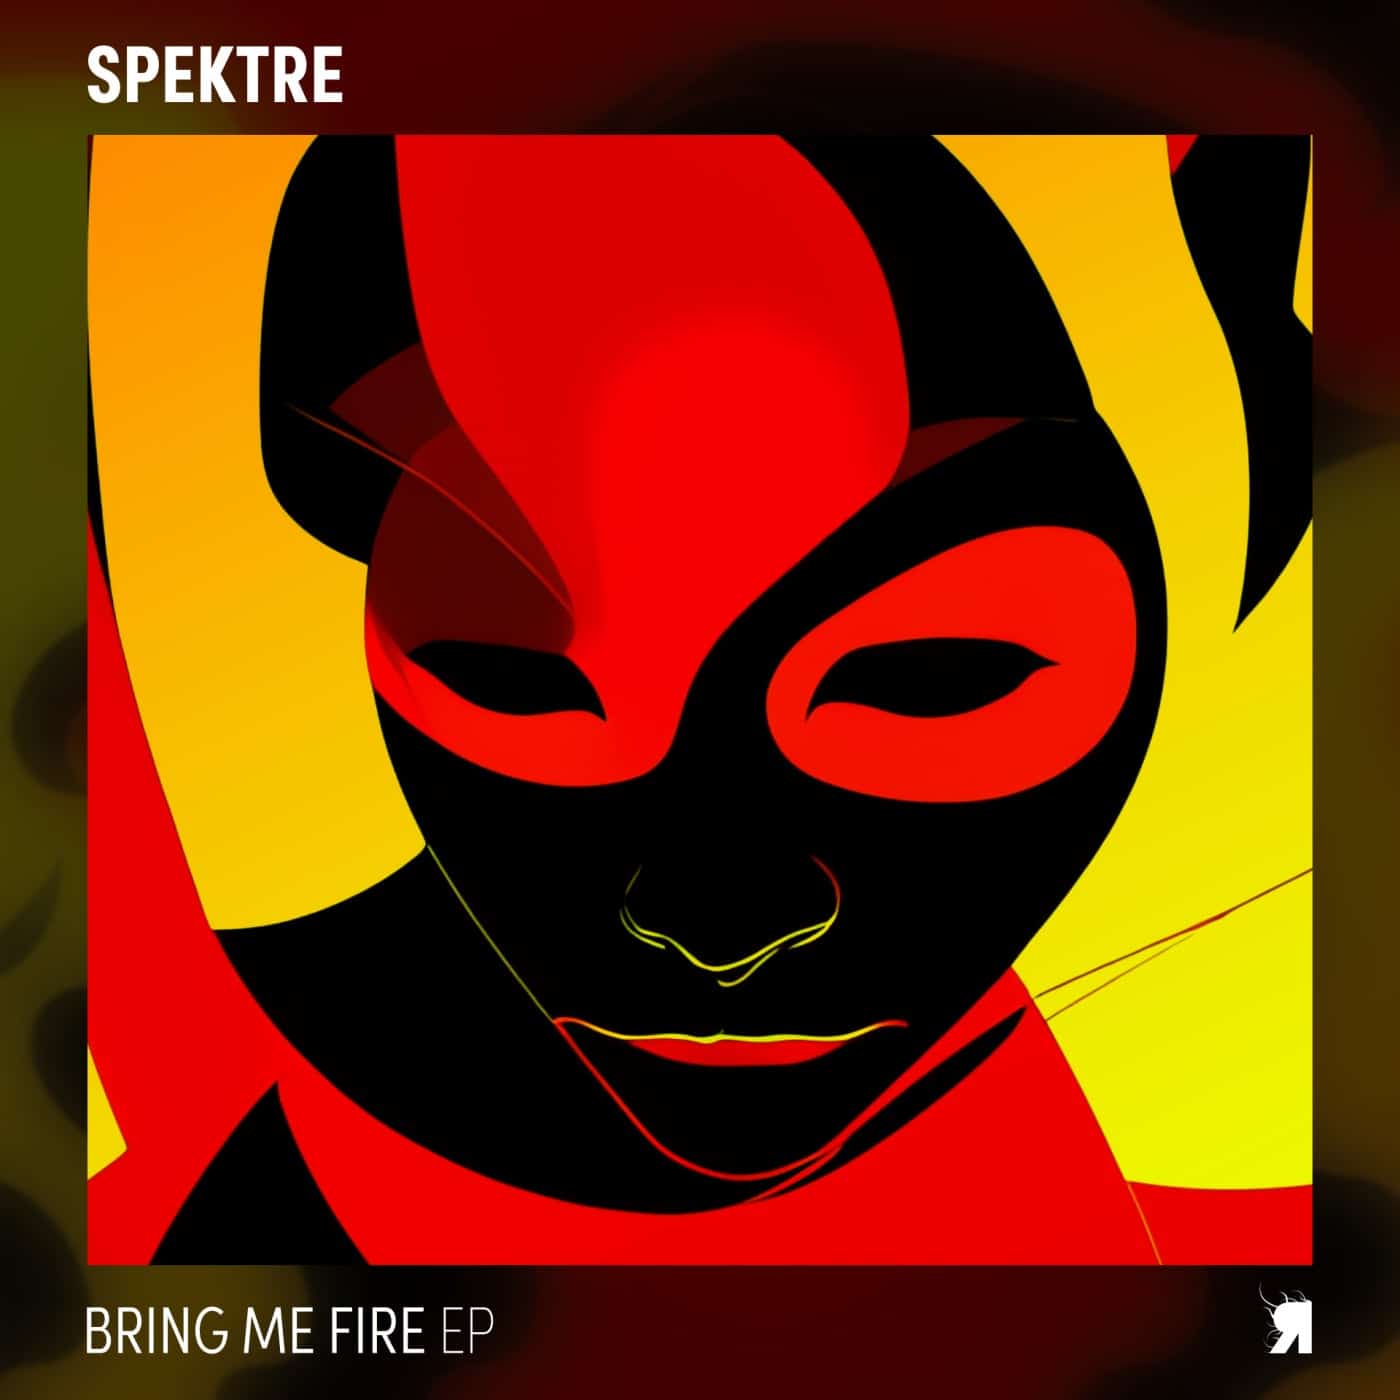 Download Spektre - Bring Me Fire EP on Electrobuzz